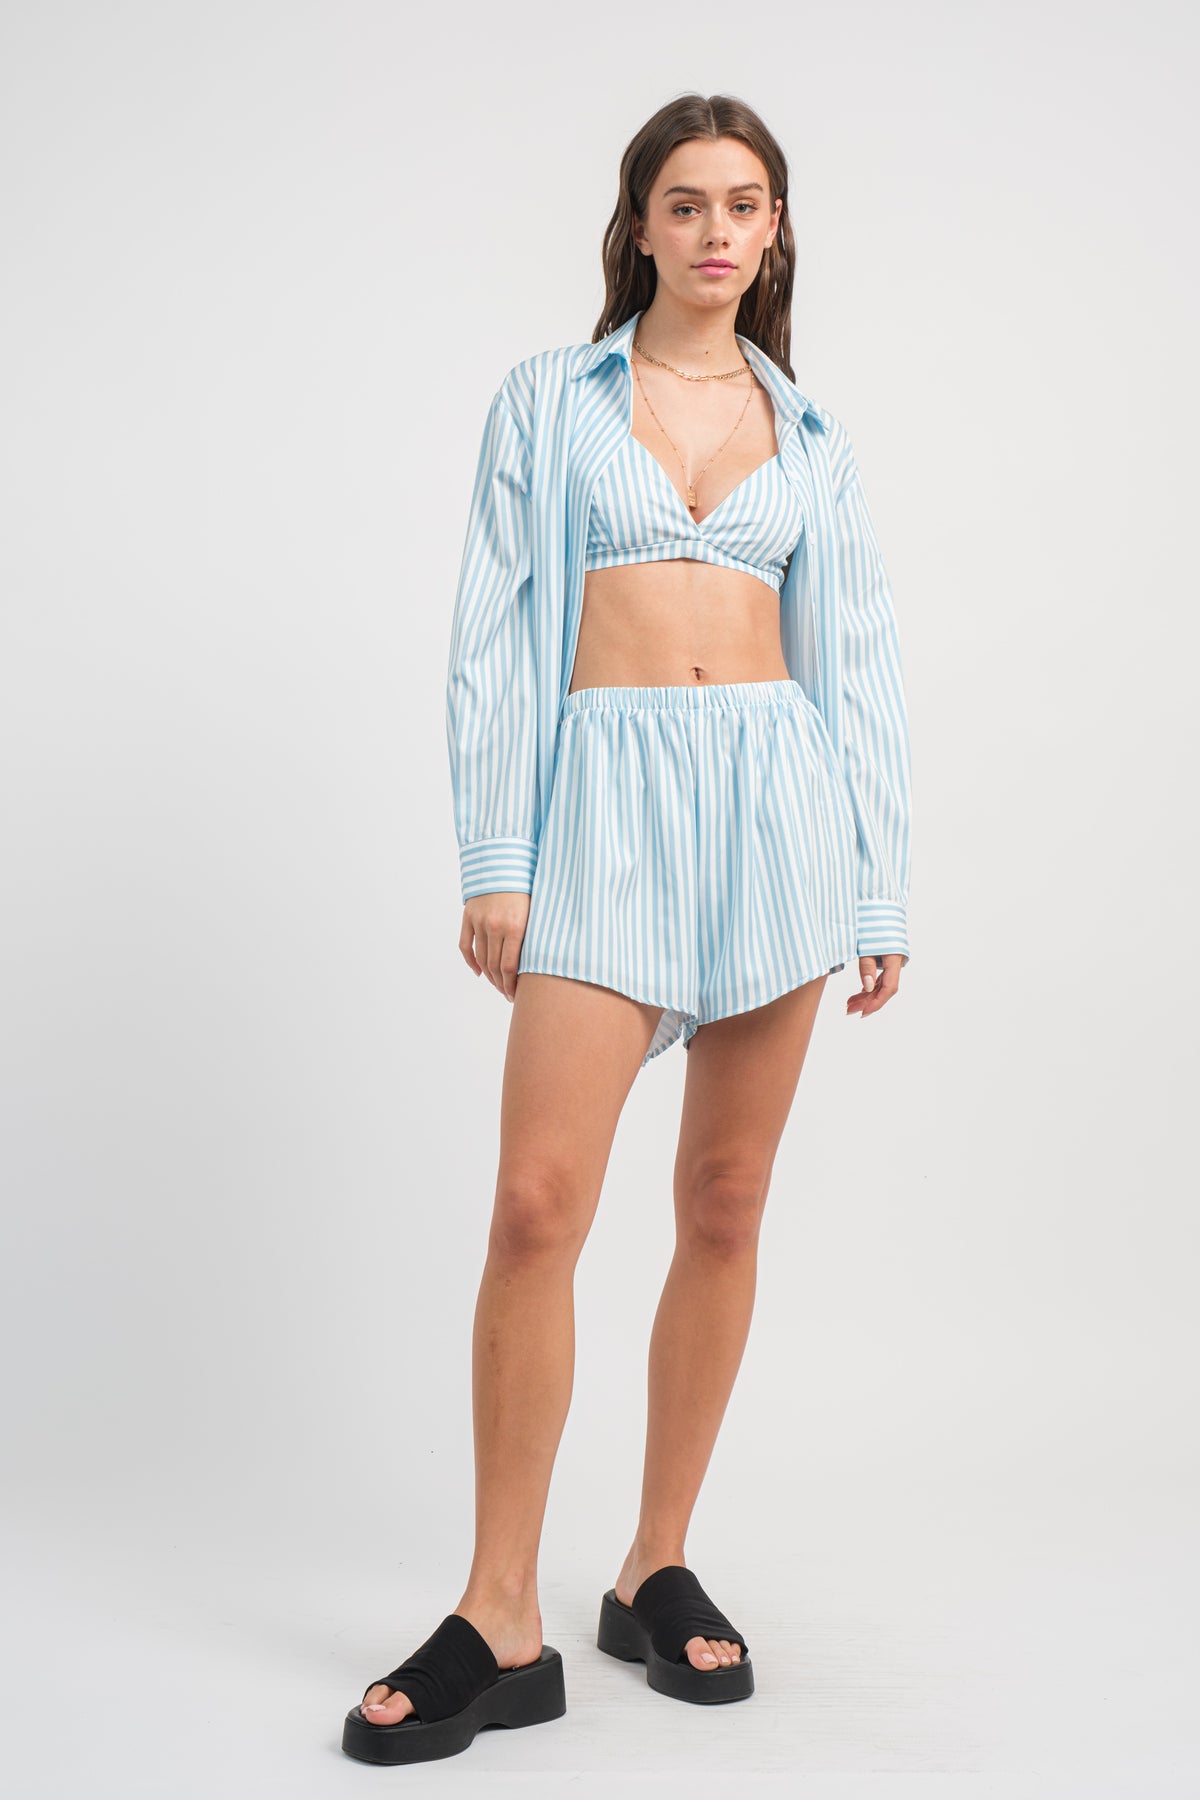 5284 | Relaxed Fit Striped Shirt & Shorts $27.50 Unit